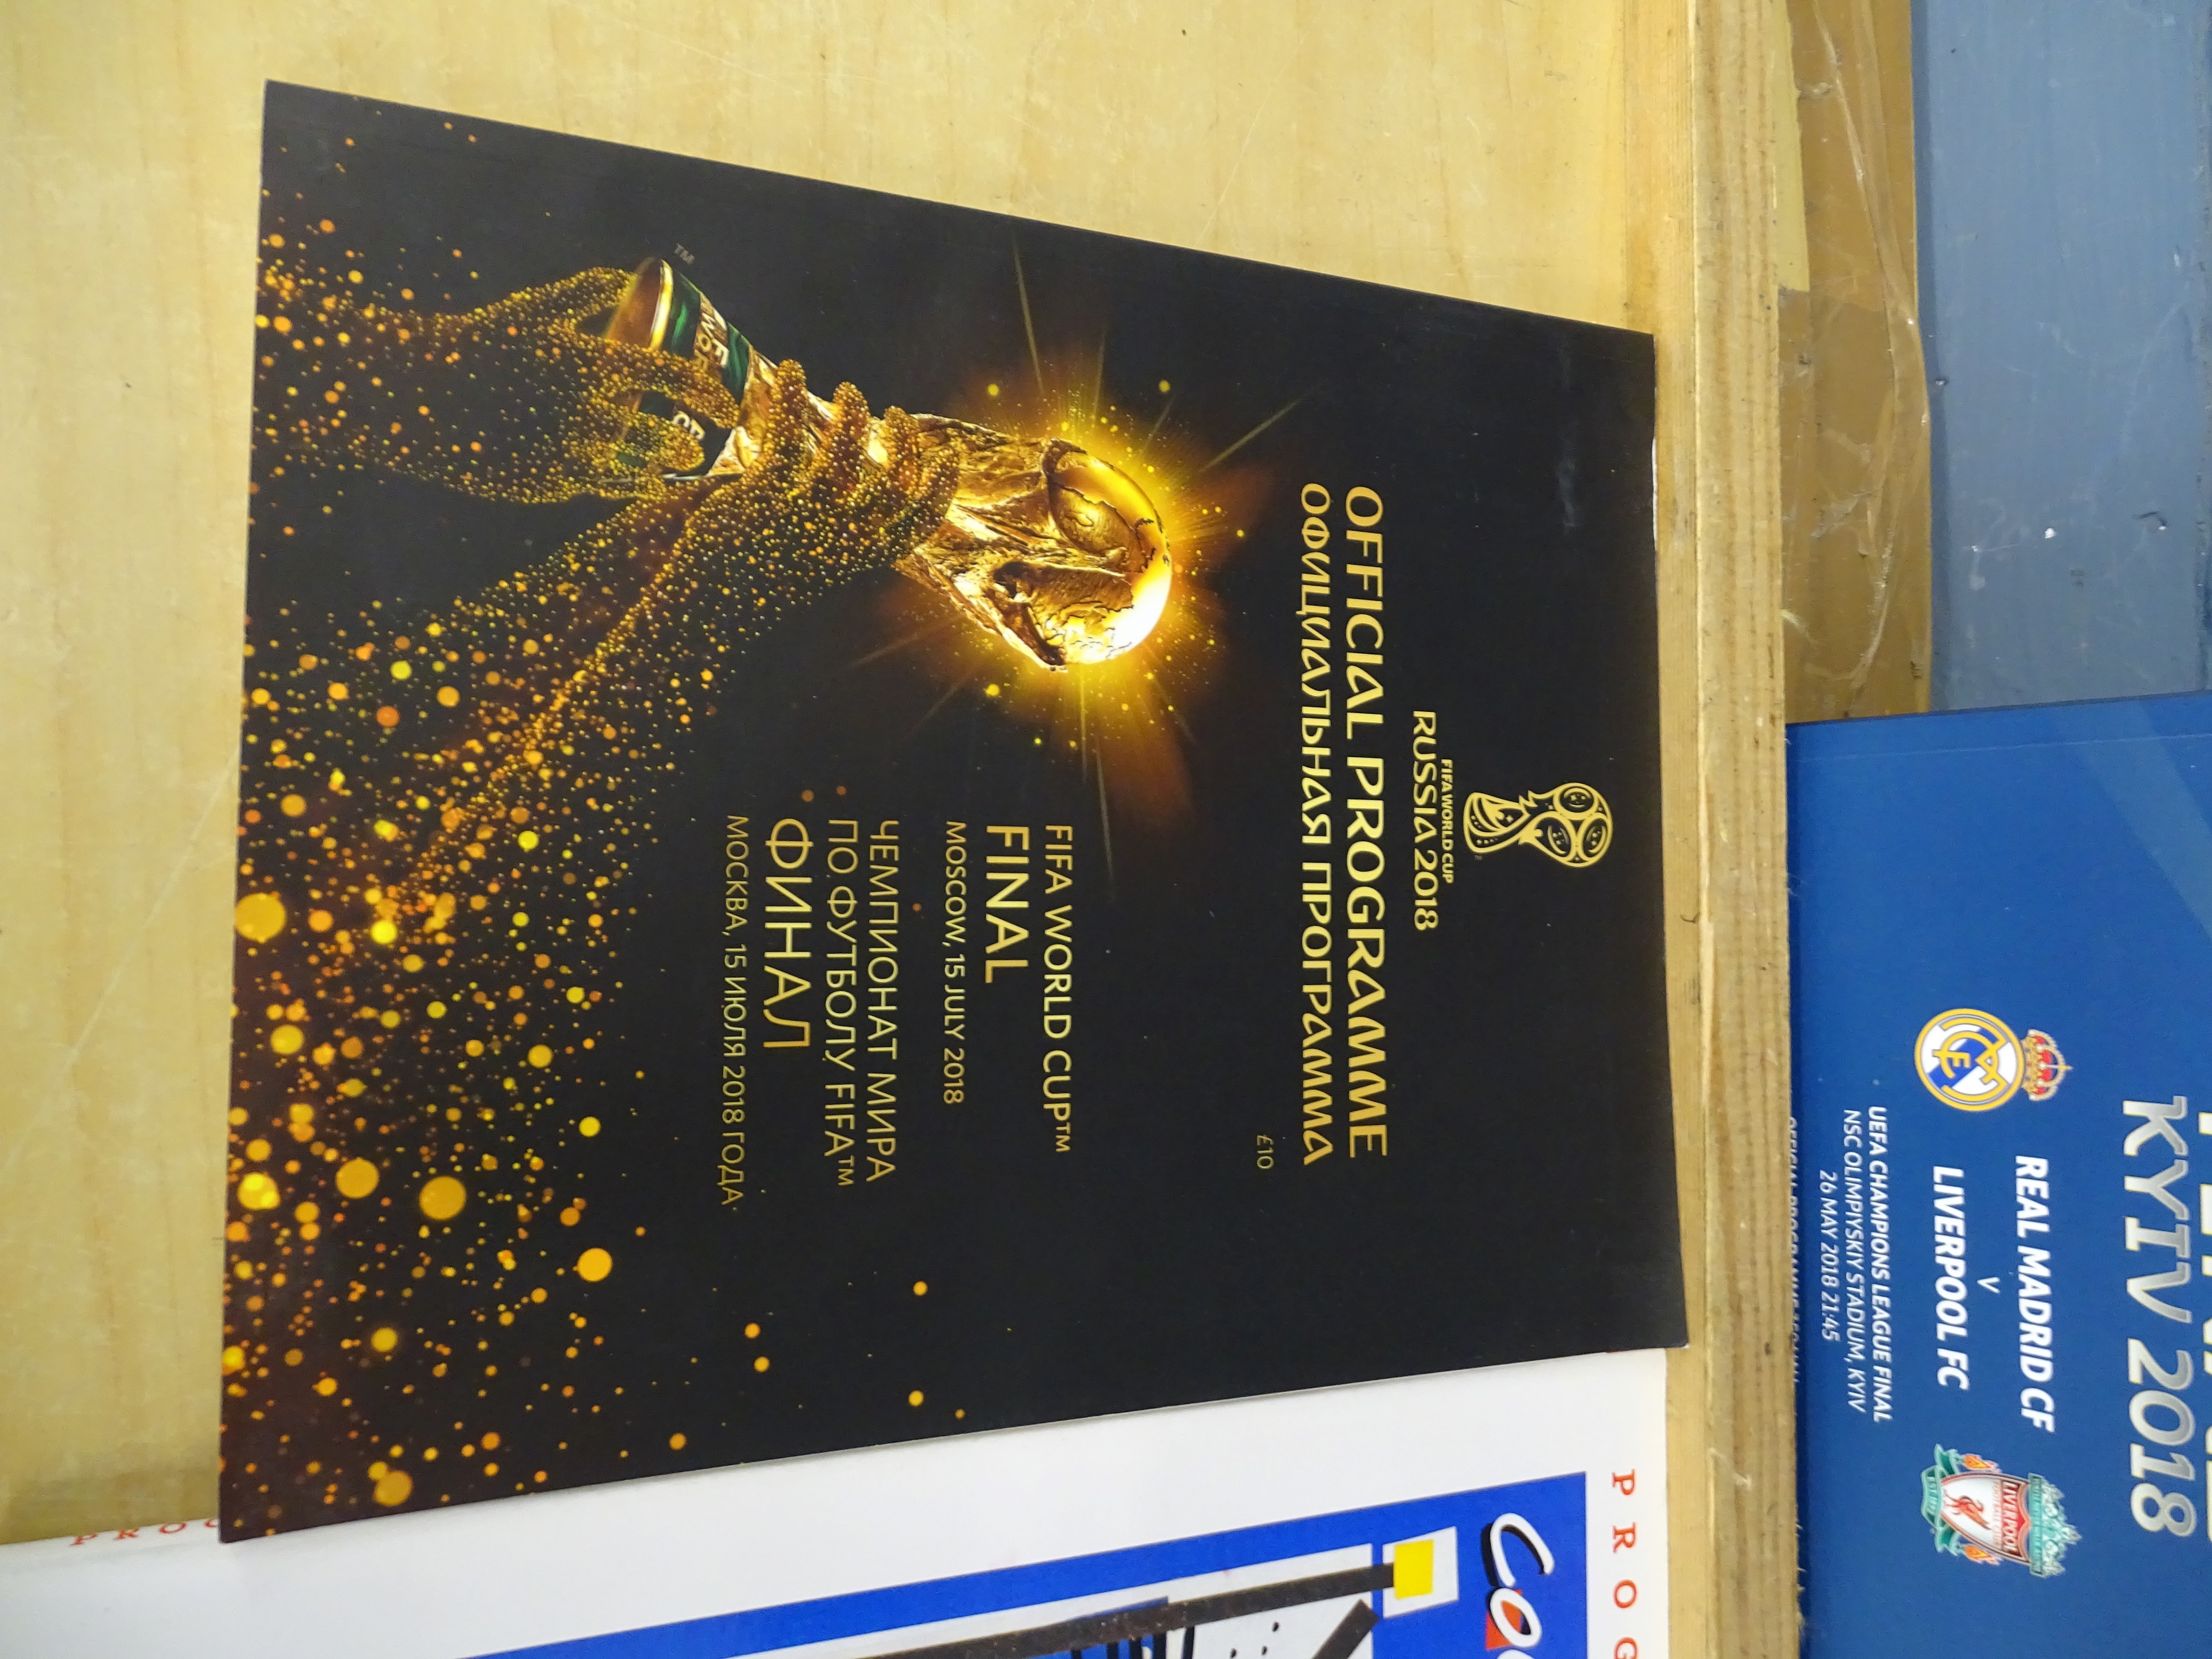 5 Football programs to include World Cup France 98 and UEFA Champions League final etc - Image 6 of 6